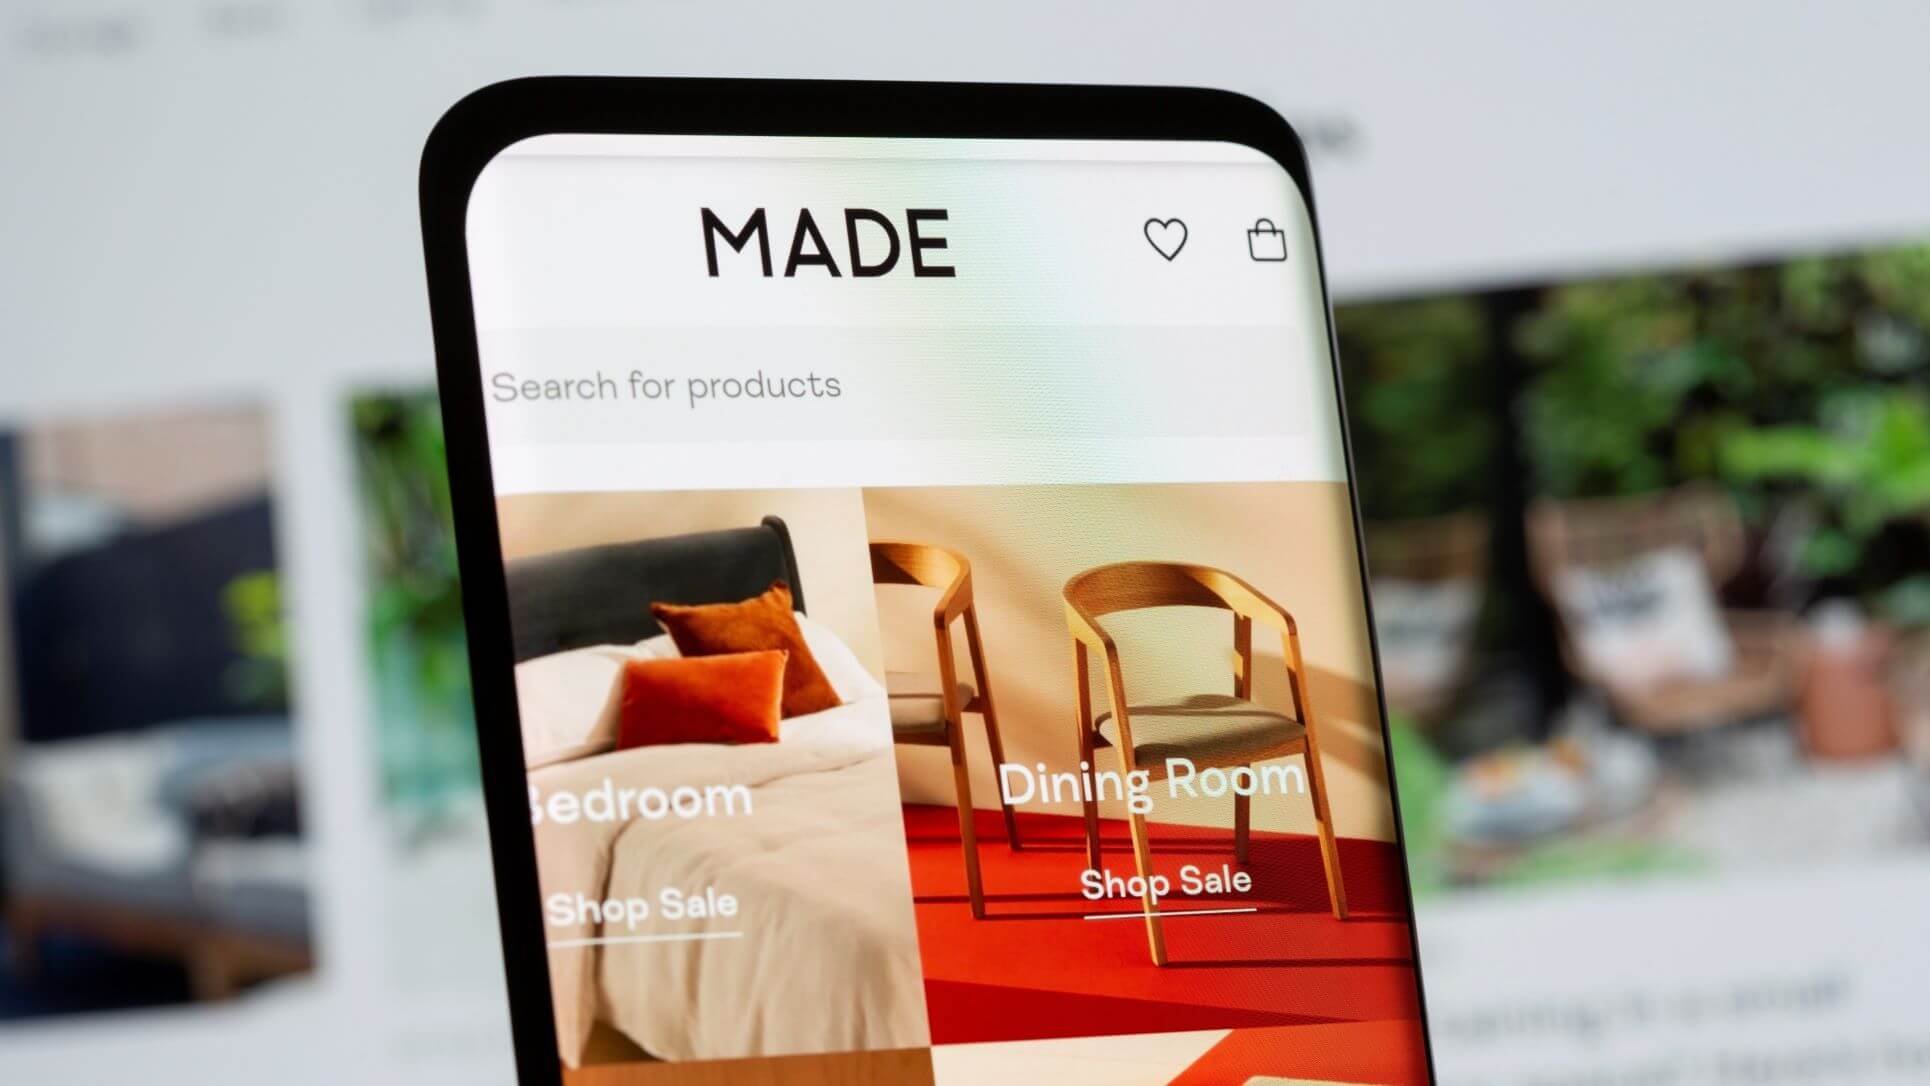 Made.com Becomes Casualty Of Britain's Consumer Squeeze